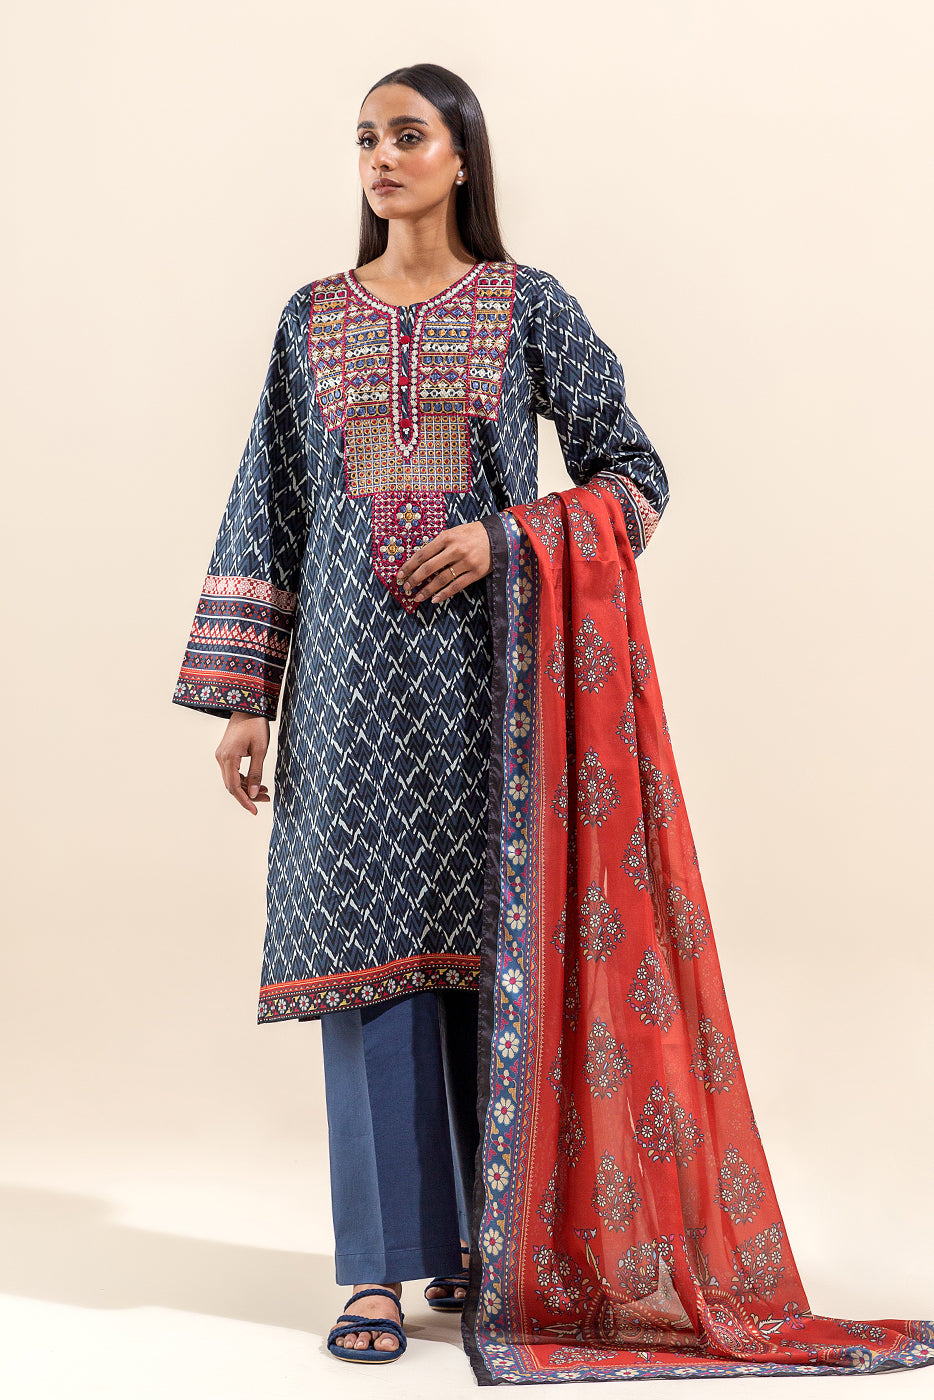 3 PIECE EMBROIDERED LAWN SUIT-SAPPHIRE FOLK (UNSTITCHED)